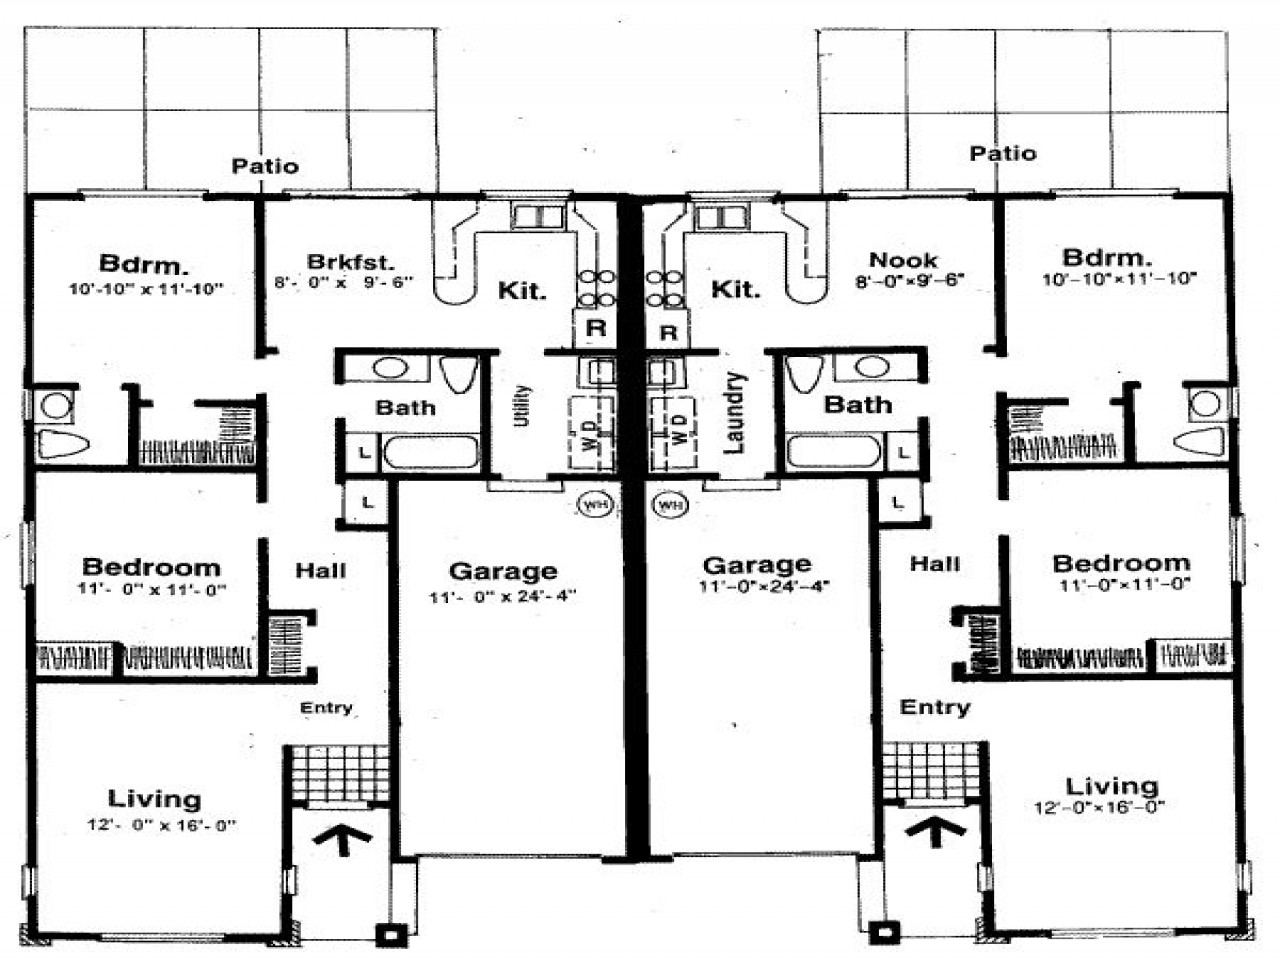 Two Master Bedroom Floor Plan
 Small Two Bedroom House Plans House Plans with Two Master